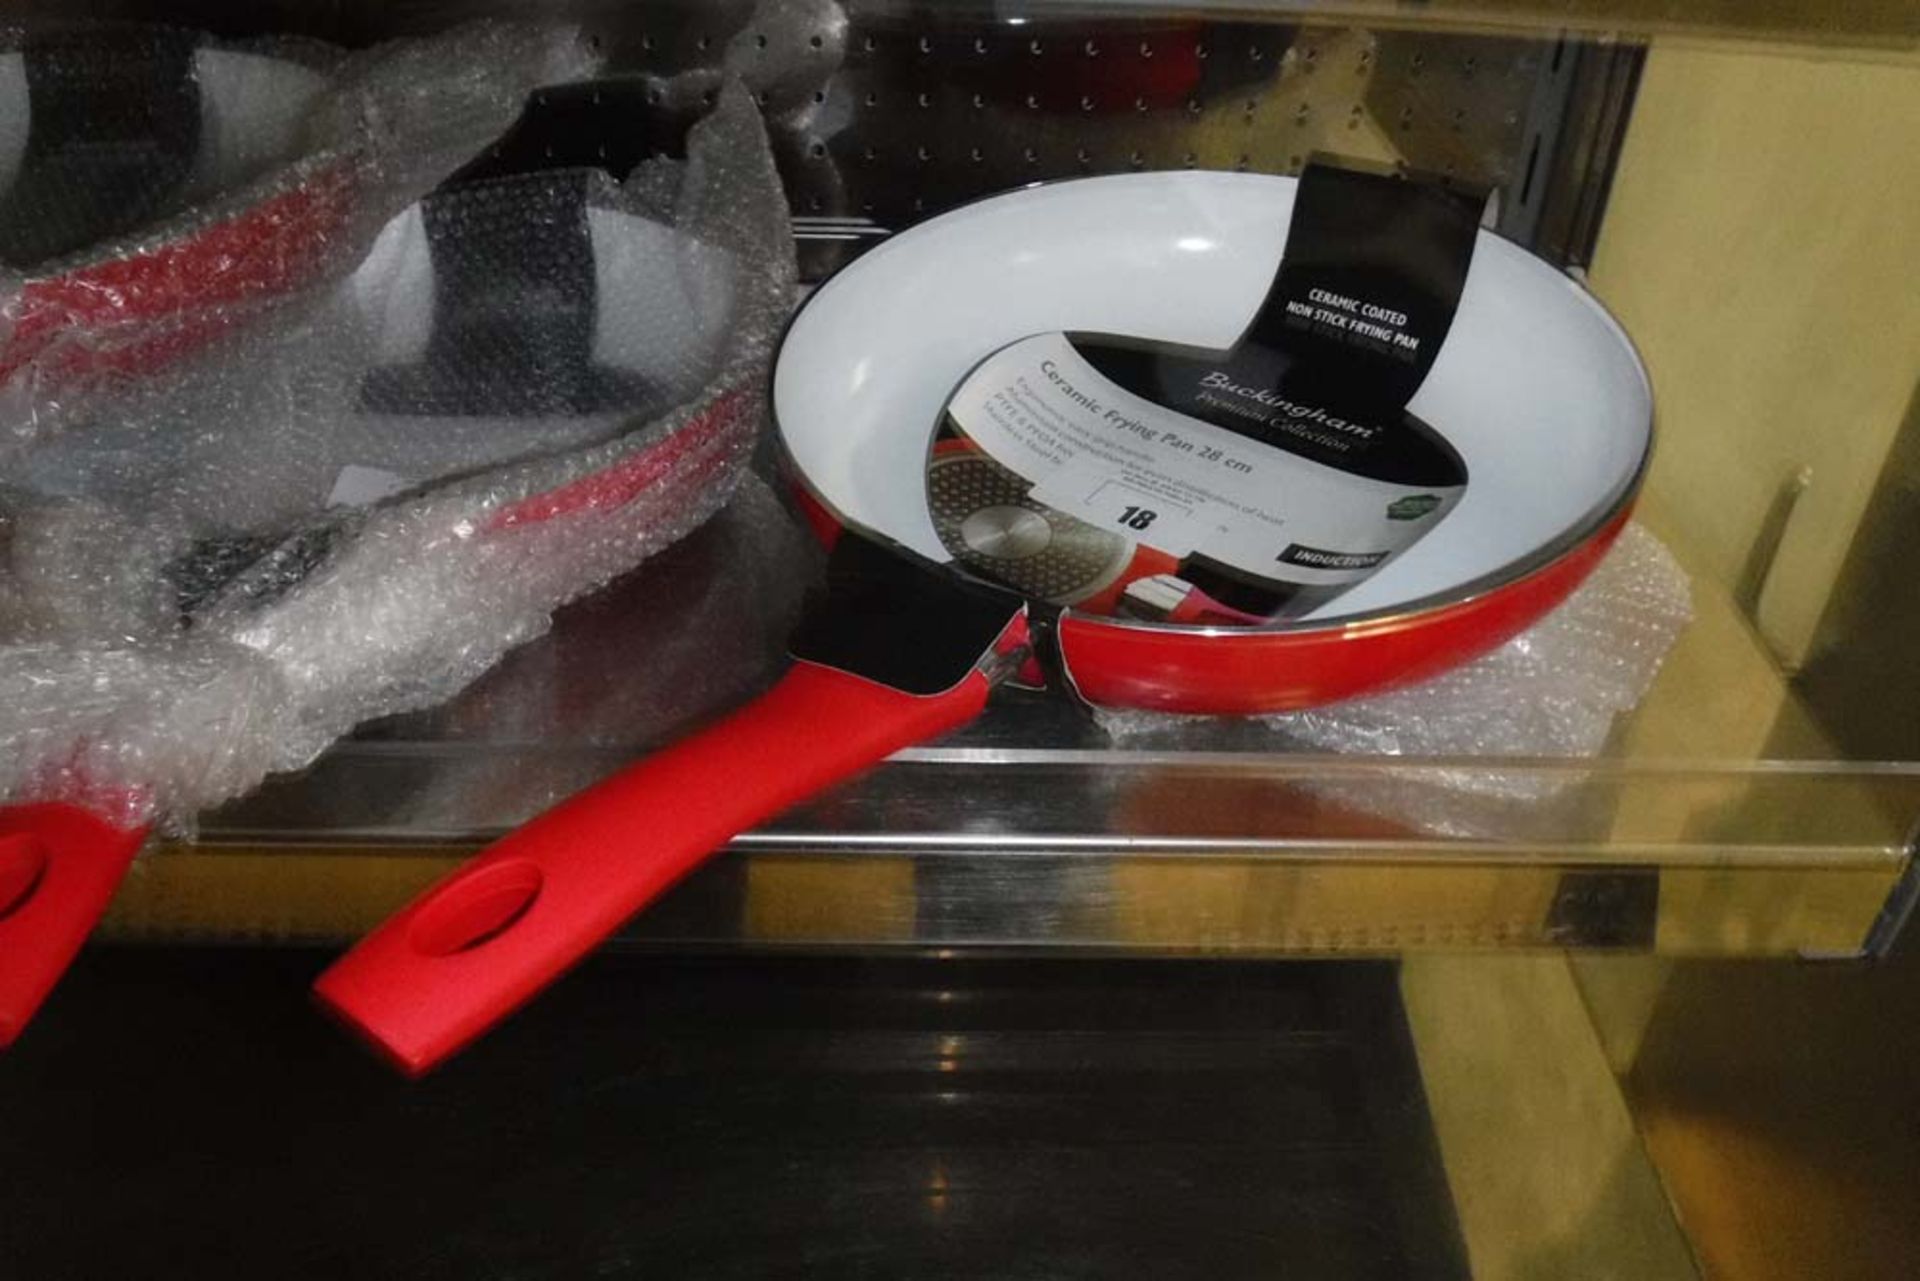 28cm Buckingham ceramic frying pan finished in red